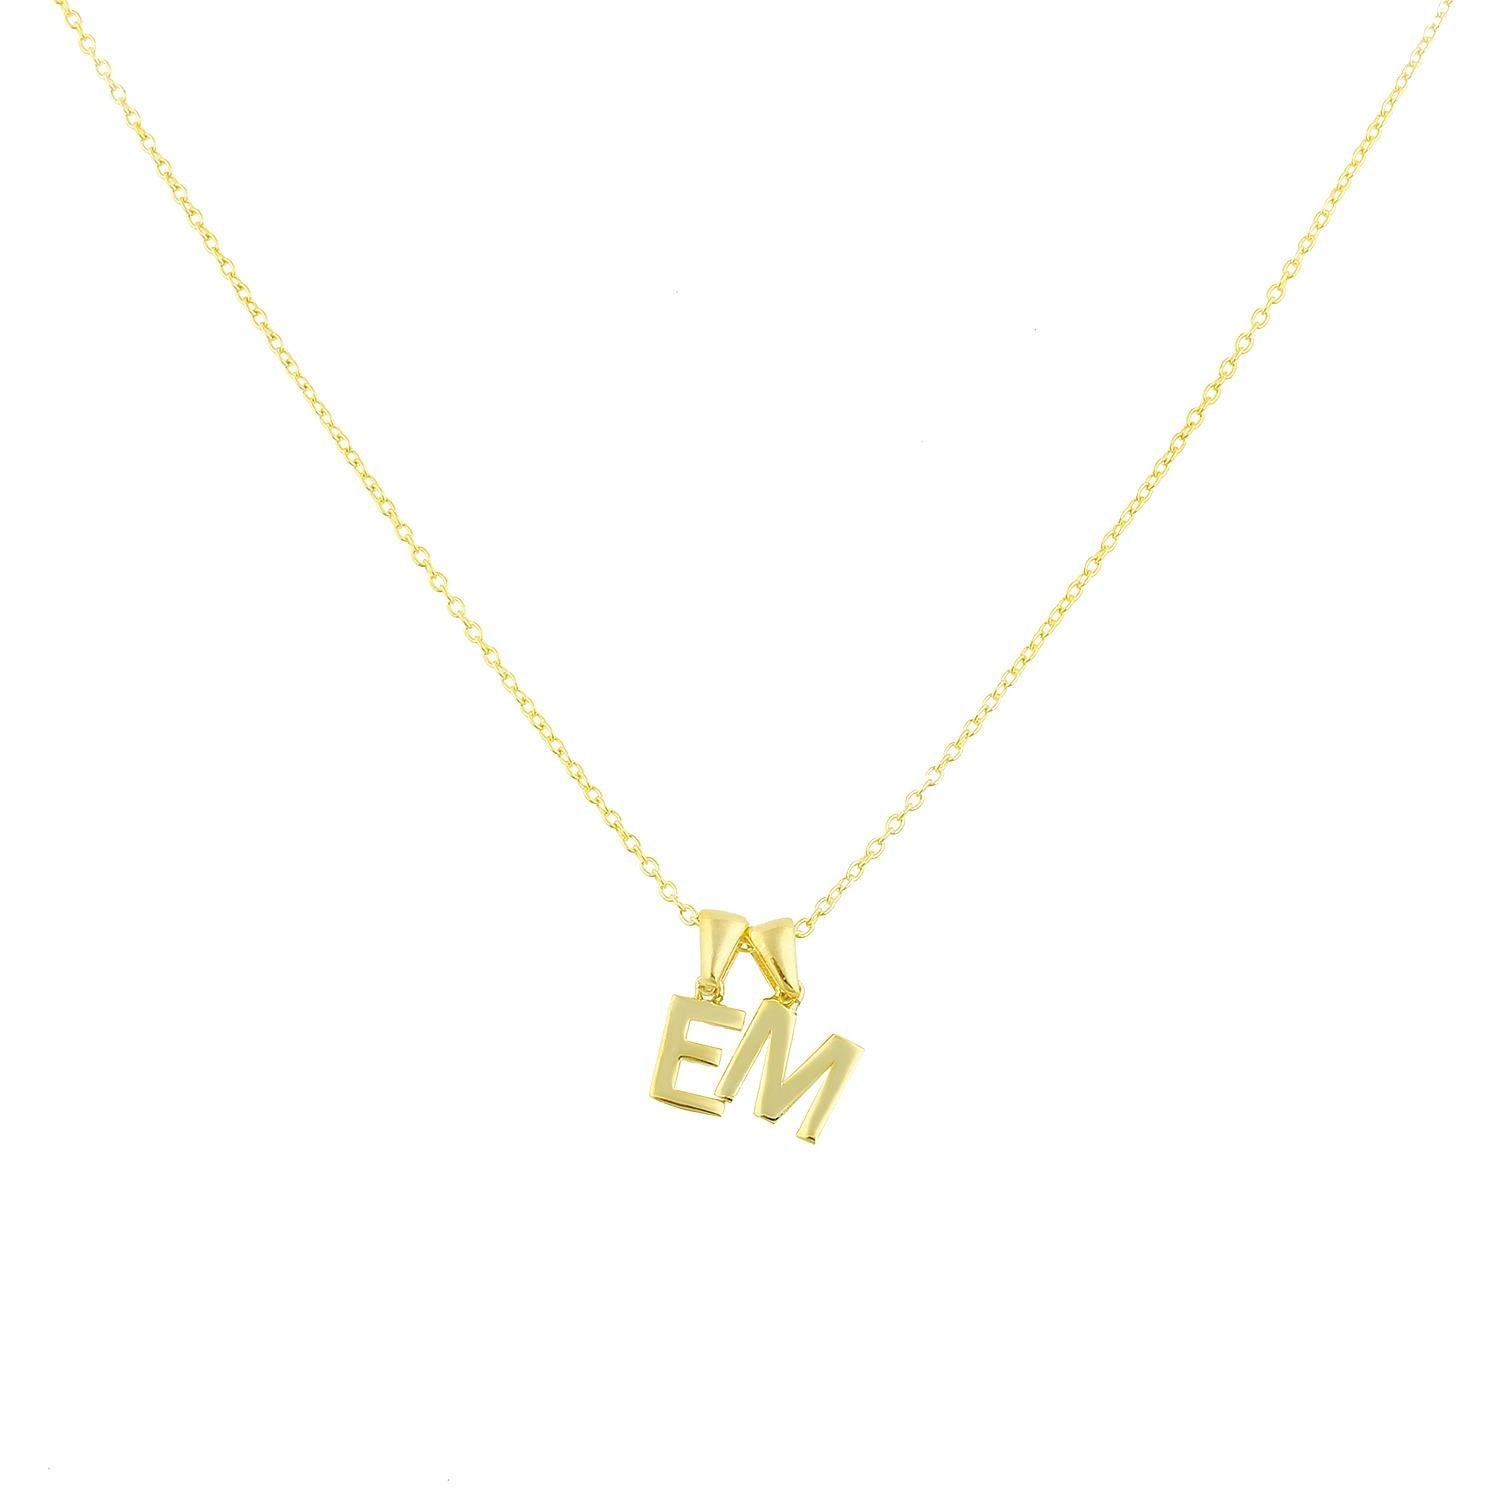 Gold Paperclip Chain Initial Necklace | 18 Paperclip Chain | Personalized Necklace | The Sis Kiss Jewelry